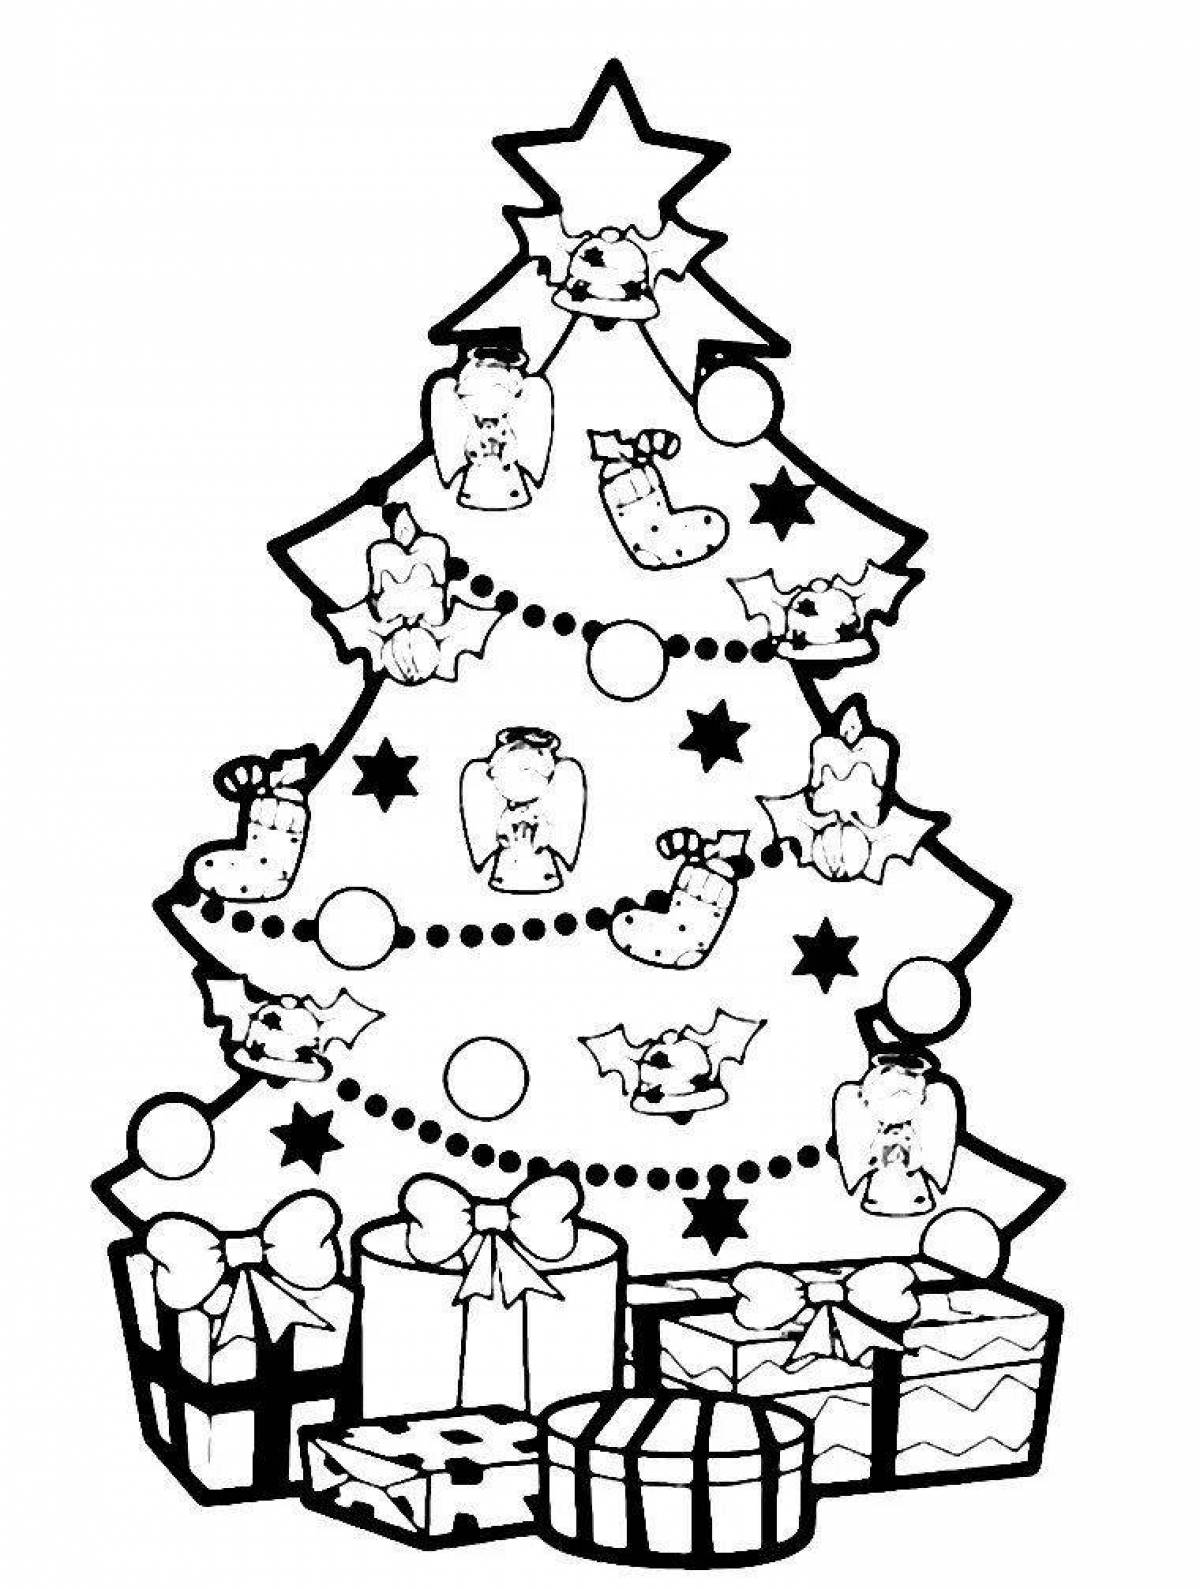 Christmas tree with gifts #6